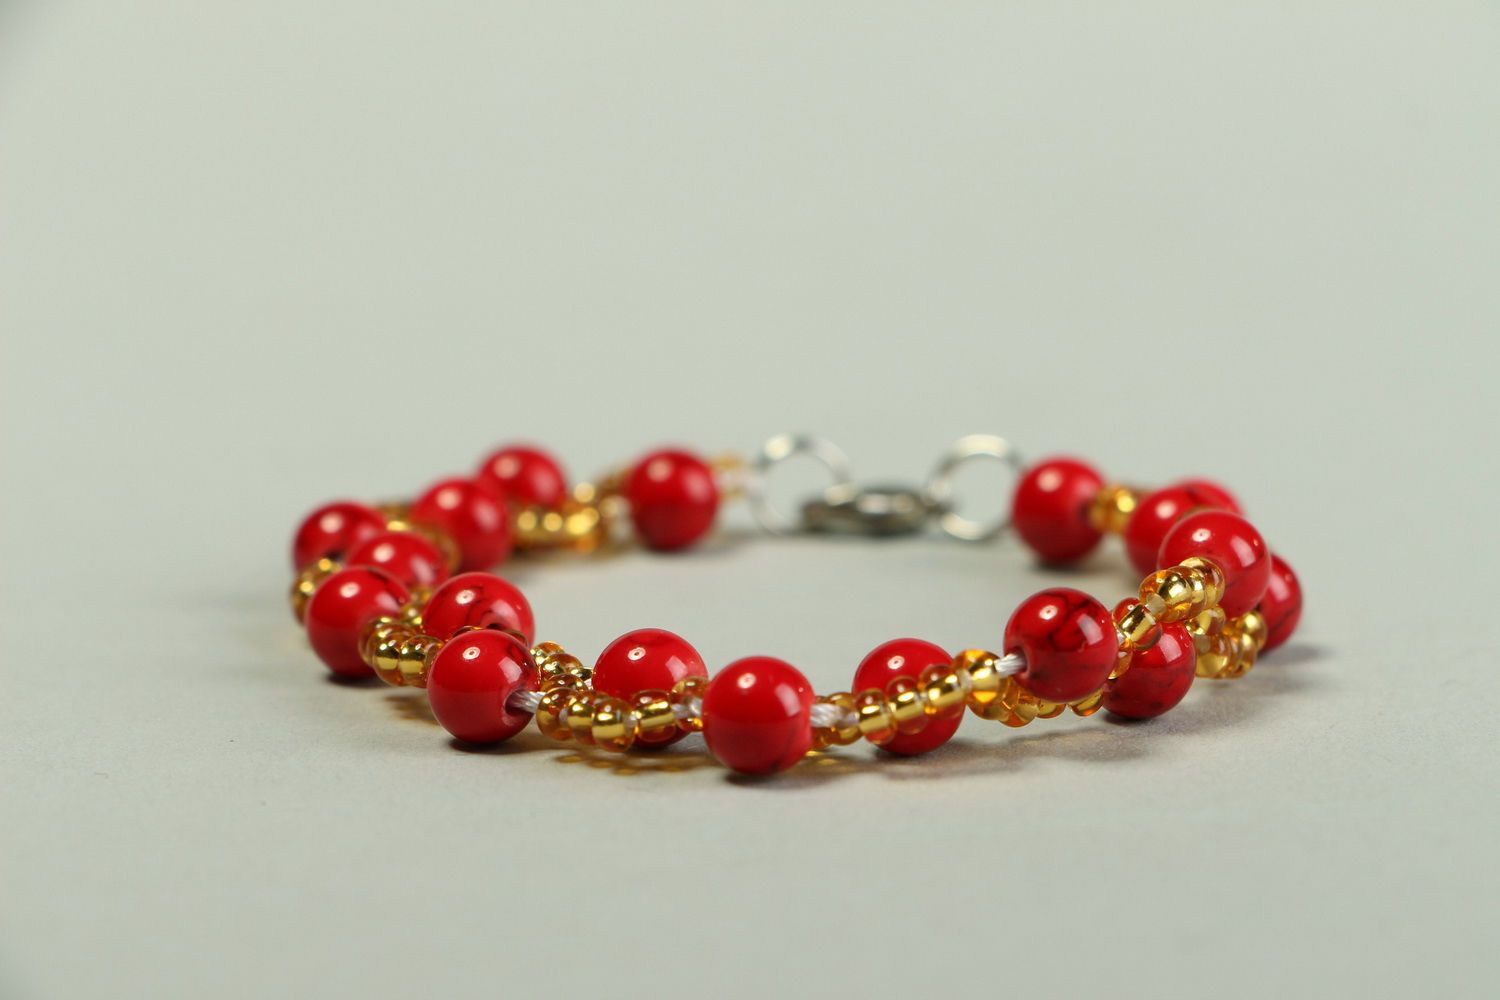 Bracelet made of coral and beads photo 4